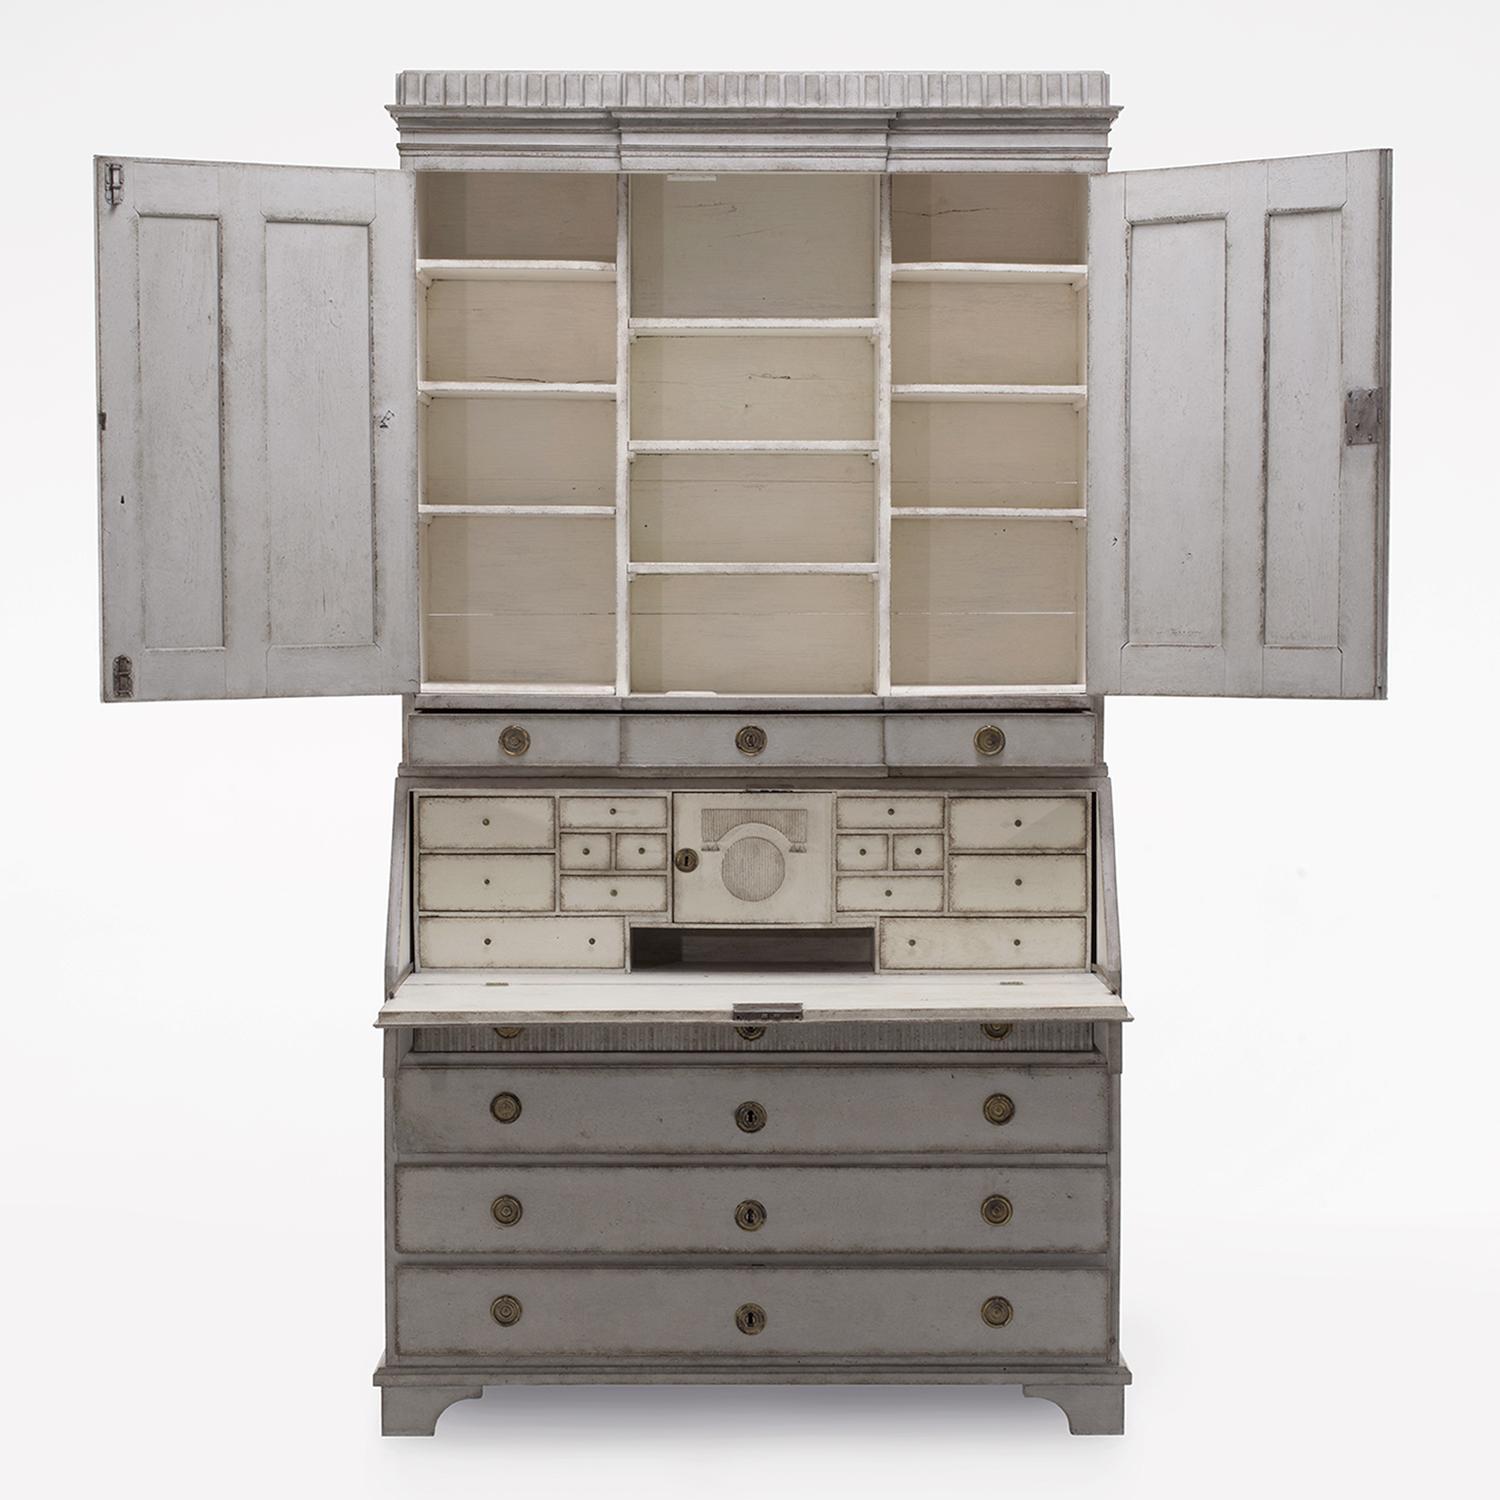 A 18th Century, light-grey, white antique Swedish Gustavian two part bureau made of hand crafted painted Pinewood, in good condition. The Scandinavian secretaire is composed with two upper doors and a writing flap, four large drawers and many small